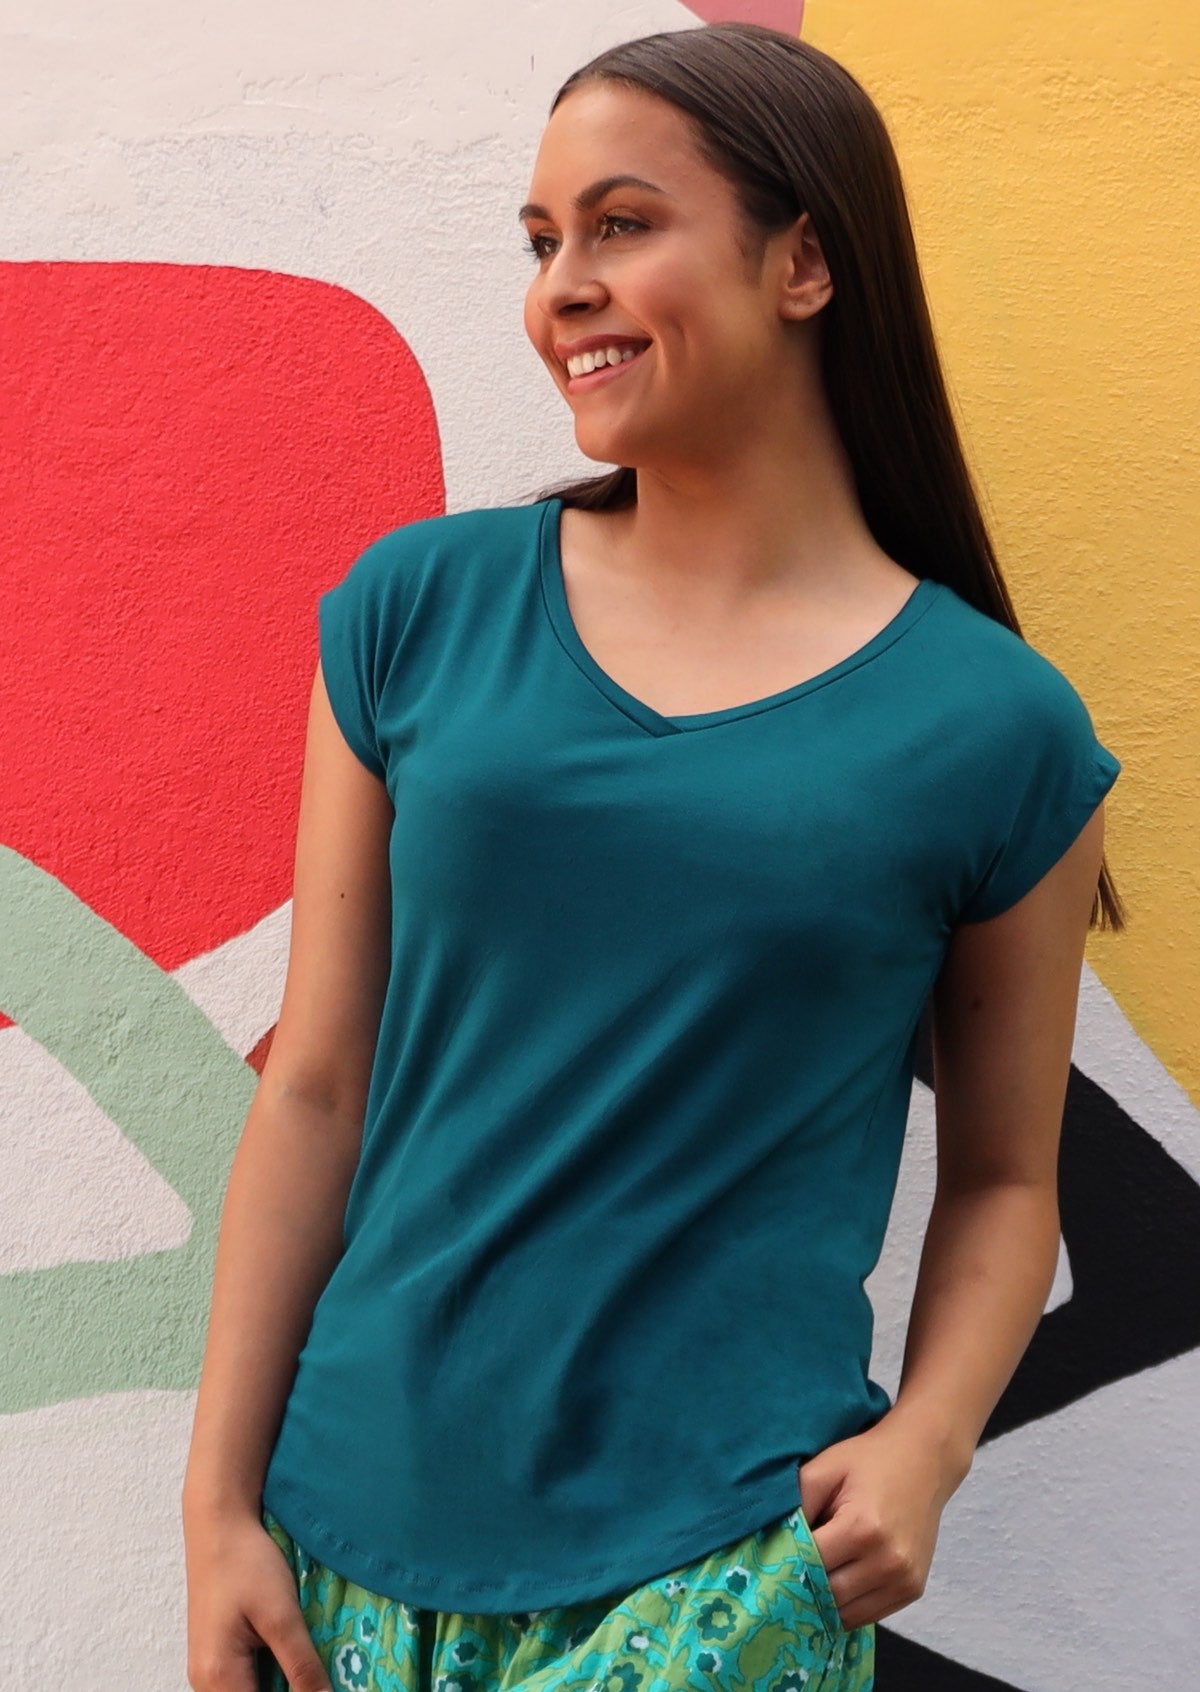 Woman with dark hair wearing a teal v-neck short cap sleeve rayon top.